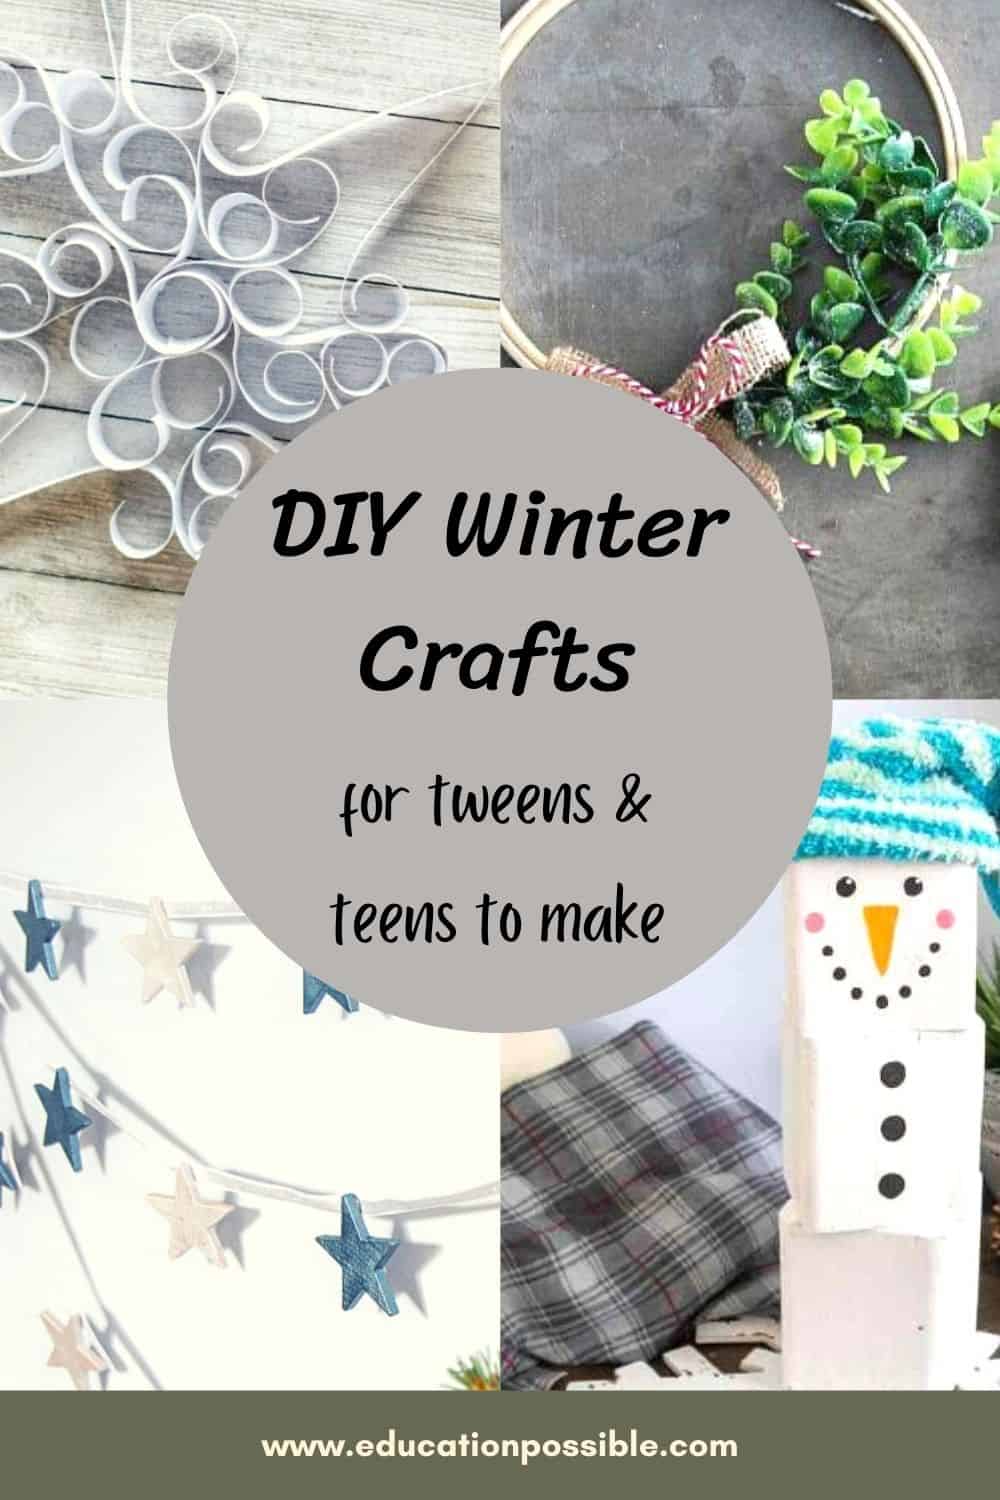 4 DIY crafts for winter. Curled paper snowflake, block snowman, hoop wreath, and star garland